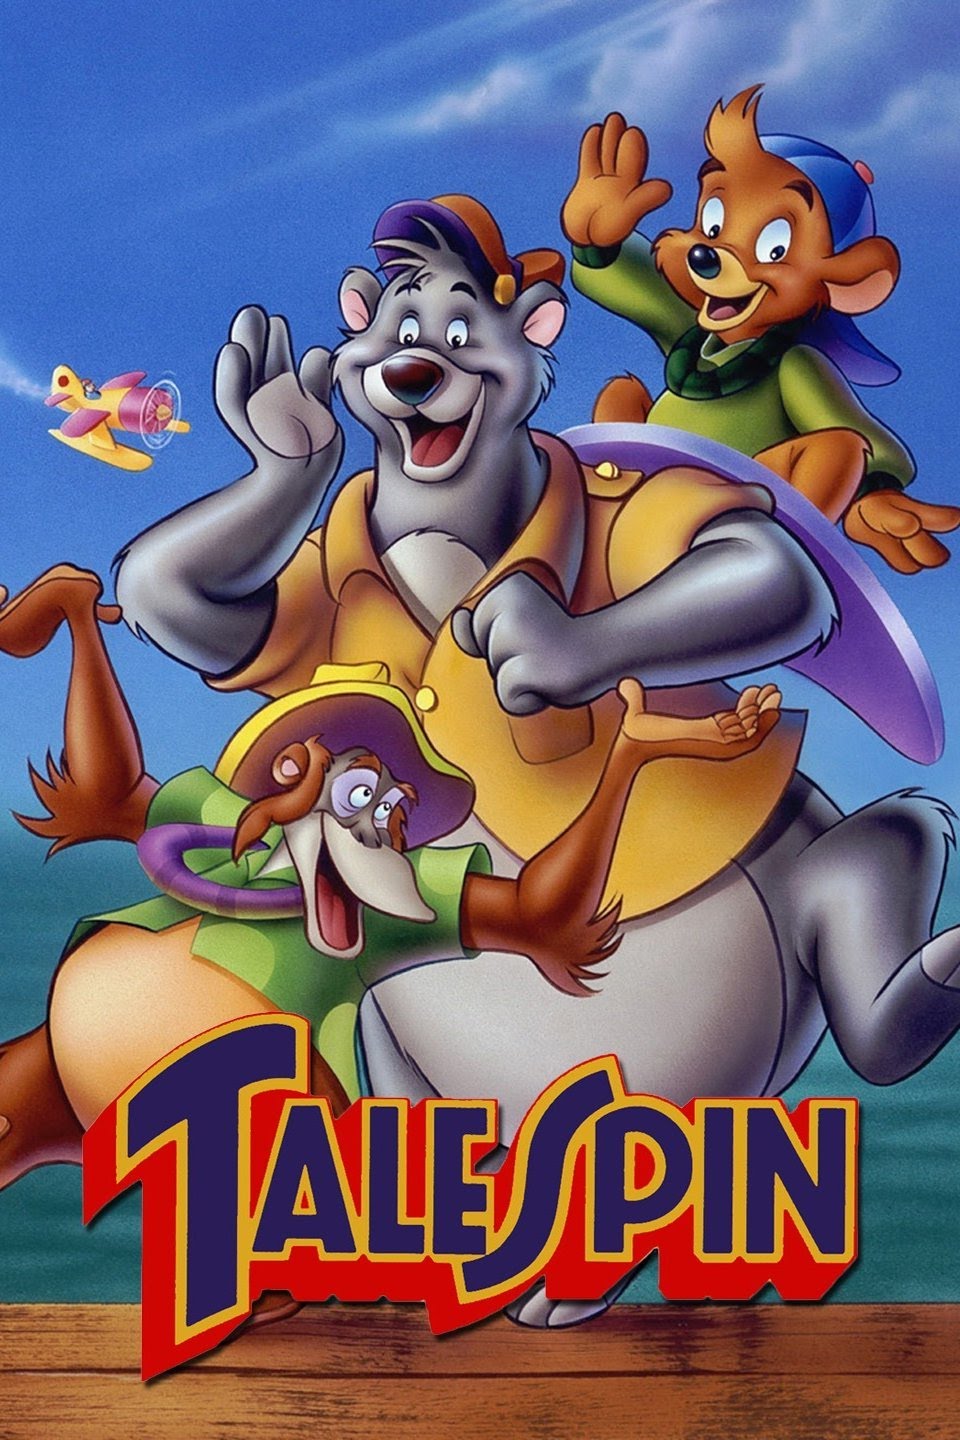 TaleSpin - Complete Series NL Gesproken 480p WEB-DL PyRA